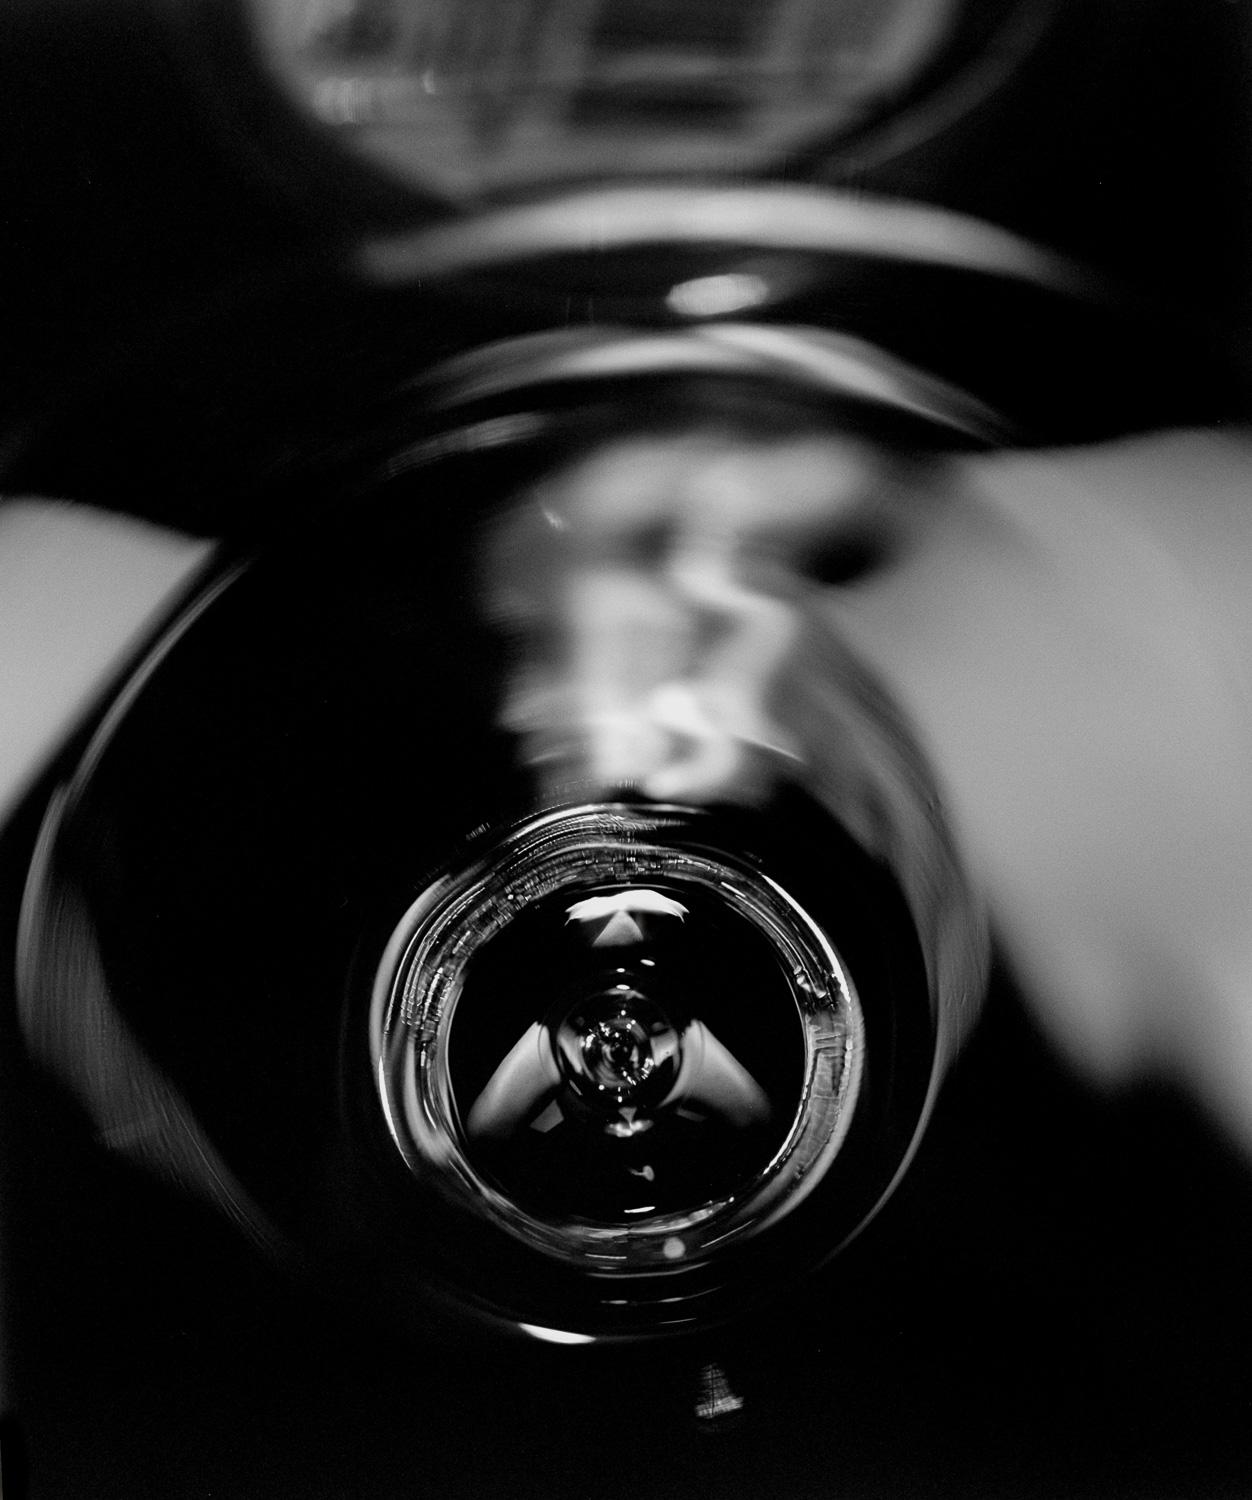 Black and white nudes, fine art photography, nude art prints, bw fine art, refraction, reflection, in glass, female, martini glass